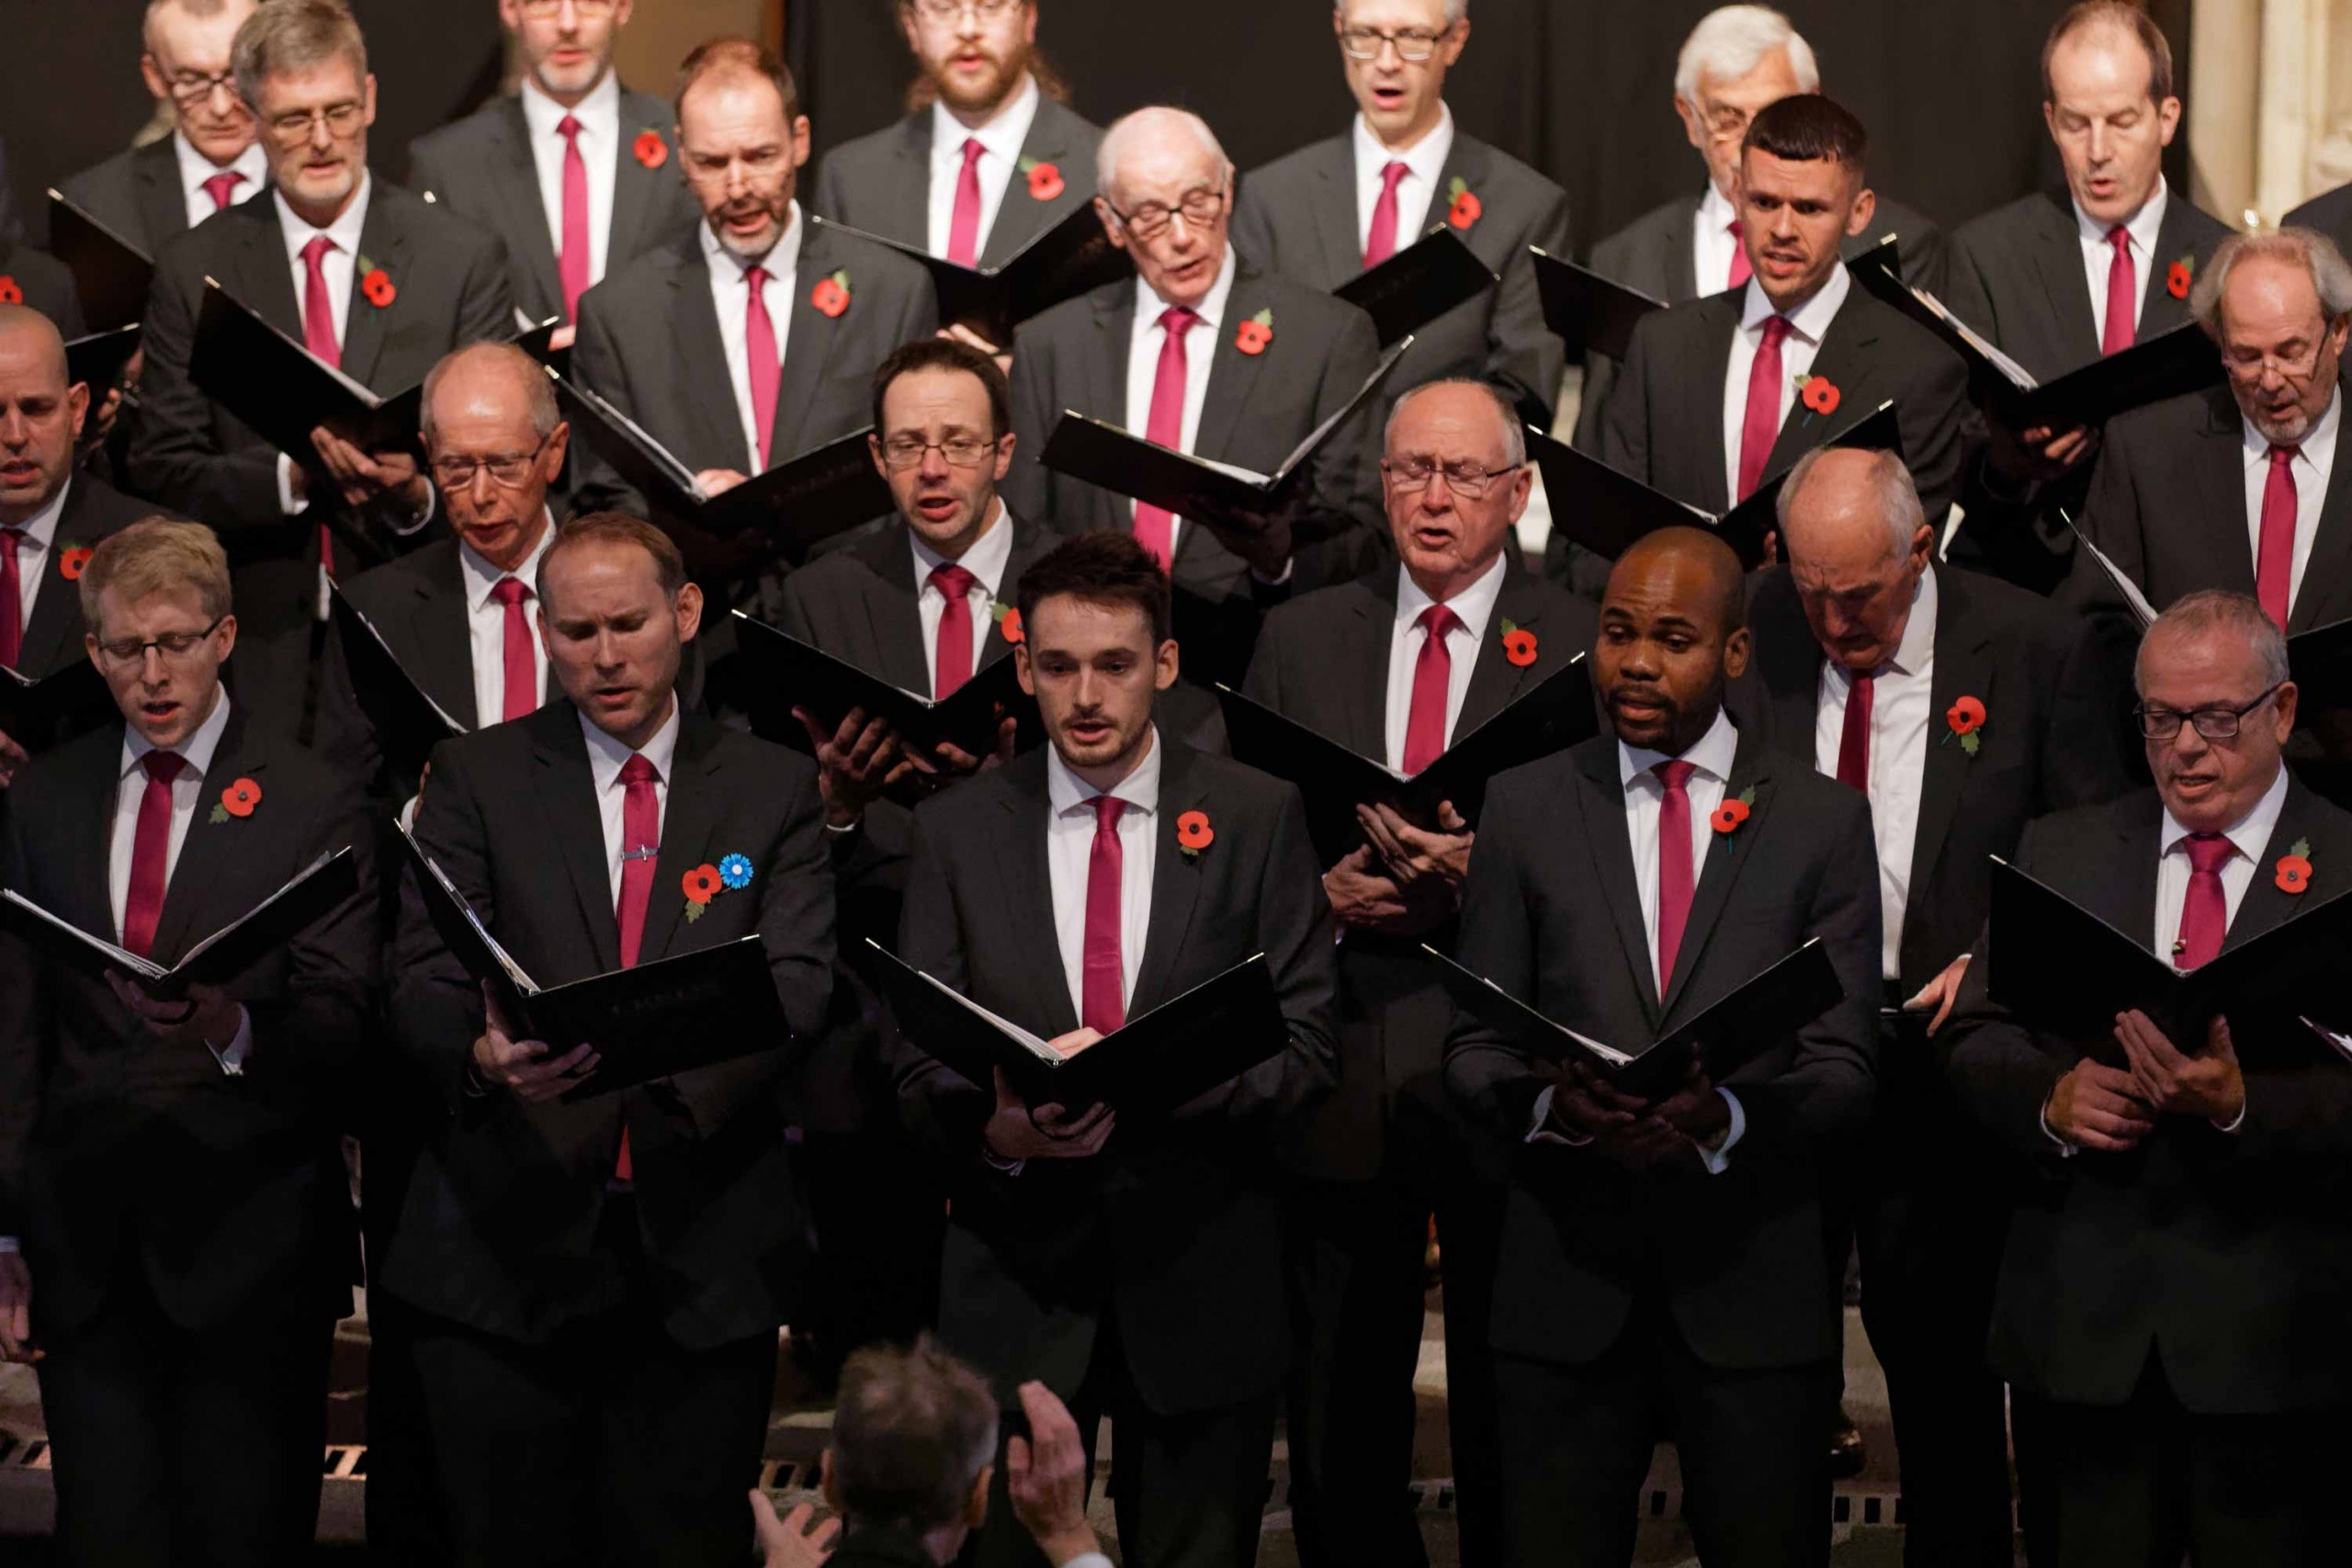 The Leeds Male Voice Choir will be singing in the cellarium at Fountains Abbey on Saturday evening (5 October 2019) for the first night of Fountains by Floodlight.